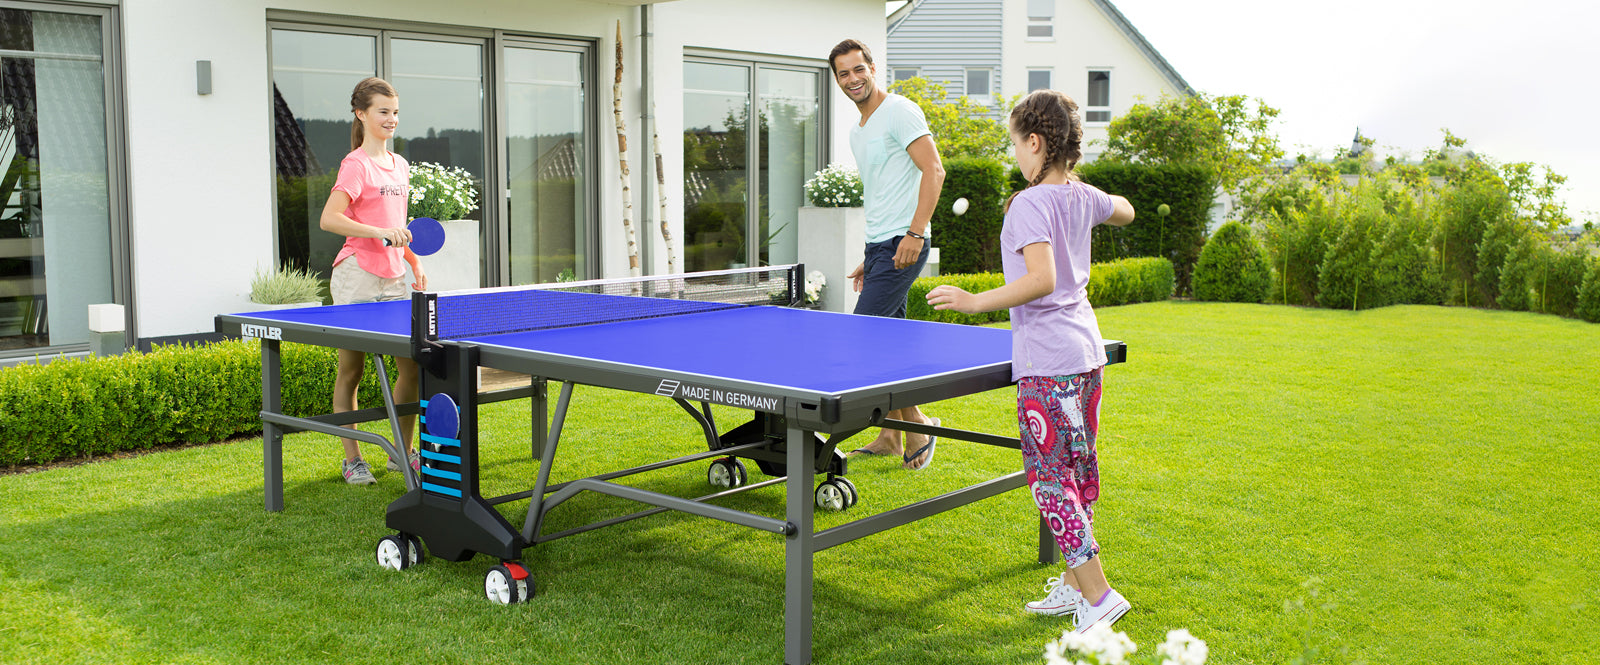 Family Playing Outdoor Table Tennis